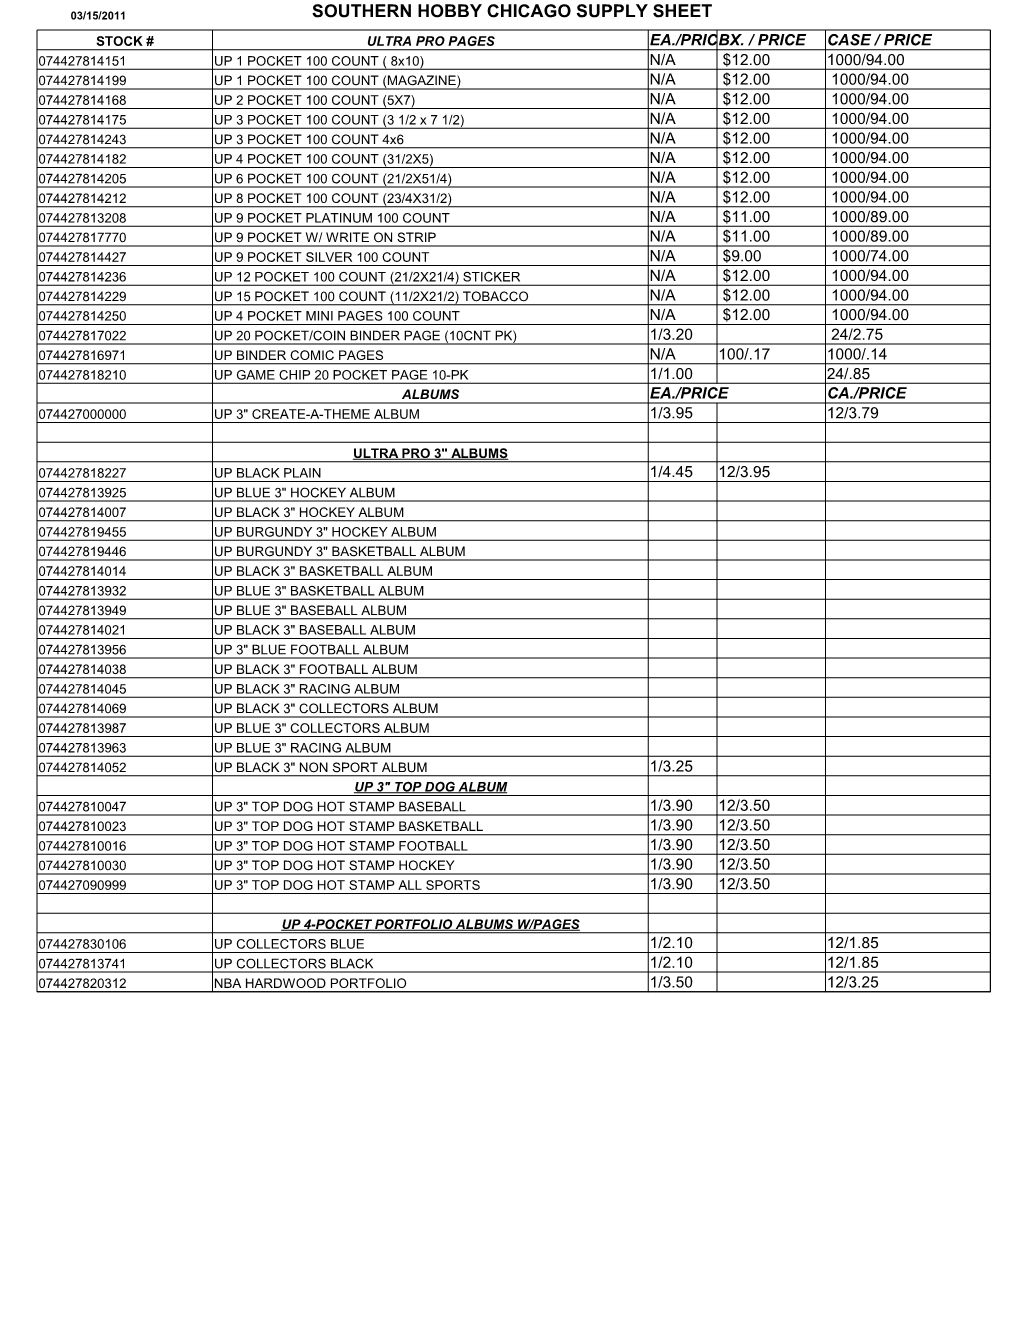 Southern Hobby Chicago Supply Sheet